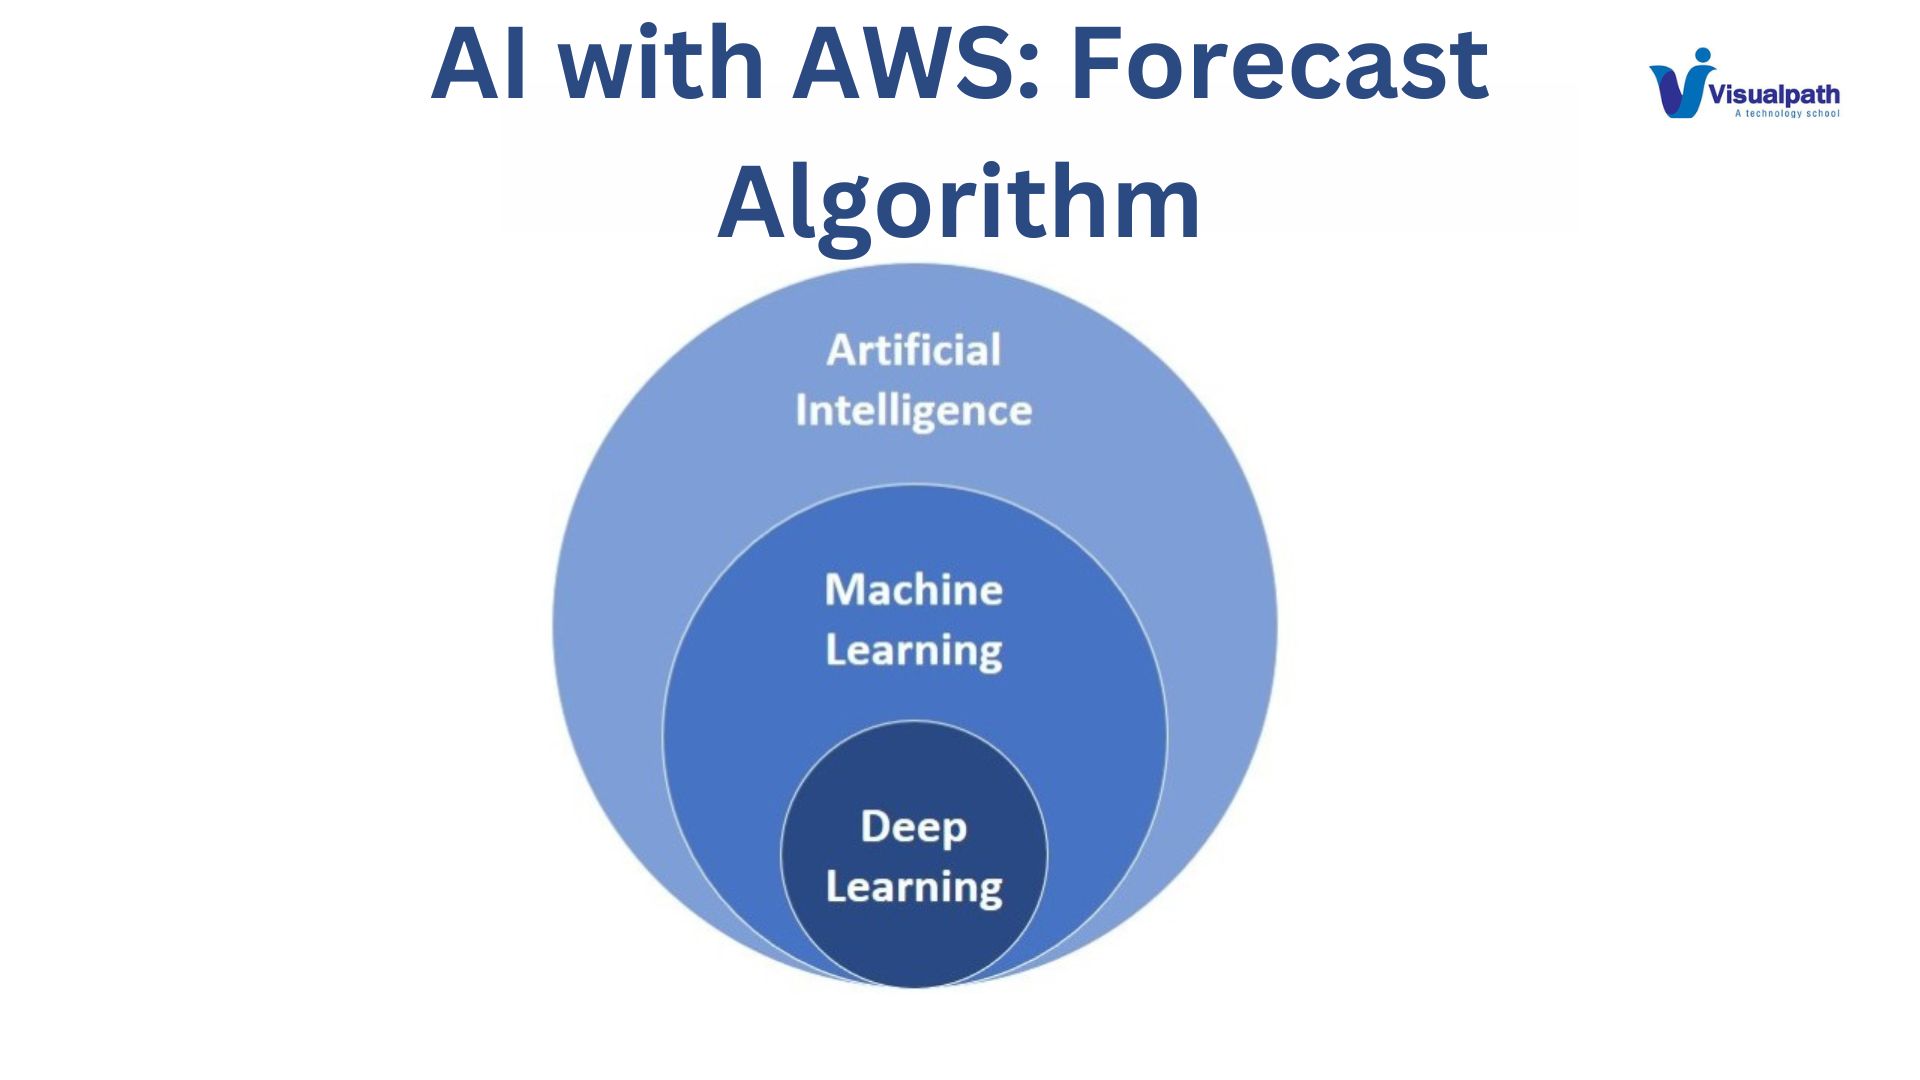 Introduction to AI with AWS: Forecast Algorithm